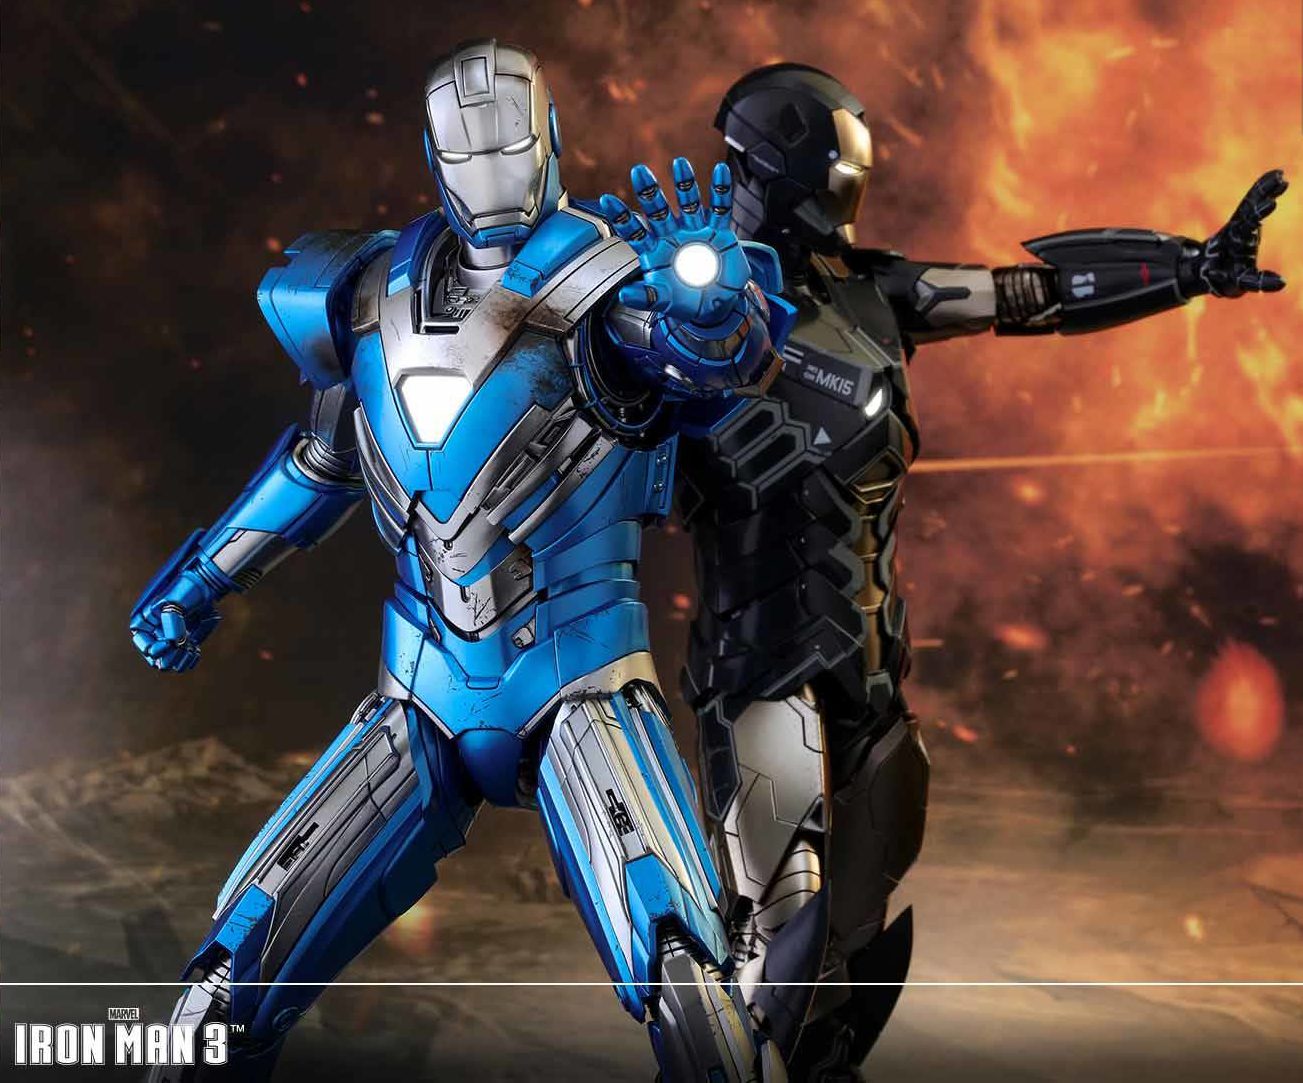 Exclusive Hot Toys Blue Steel Iron Man 